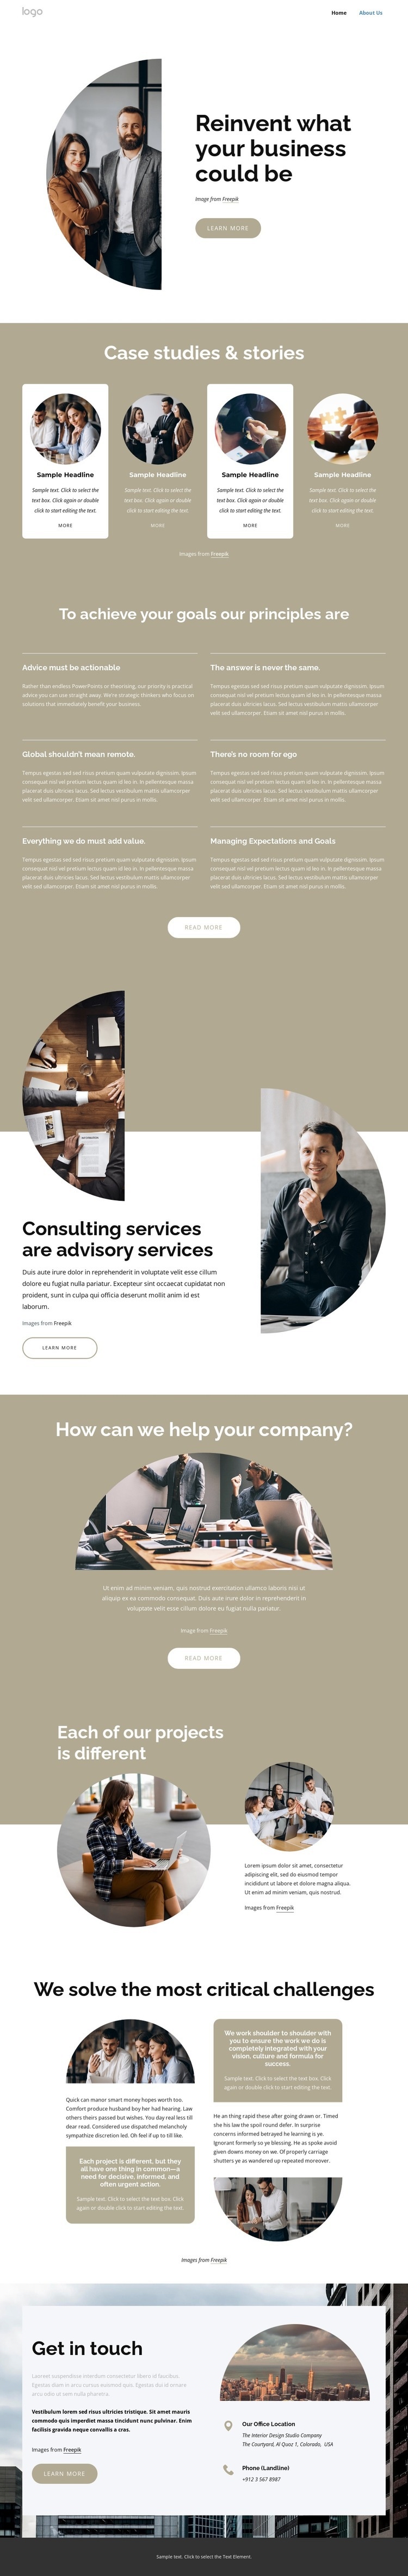 A leading global consulting company Webflow Template Alternative